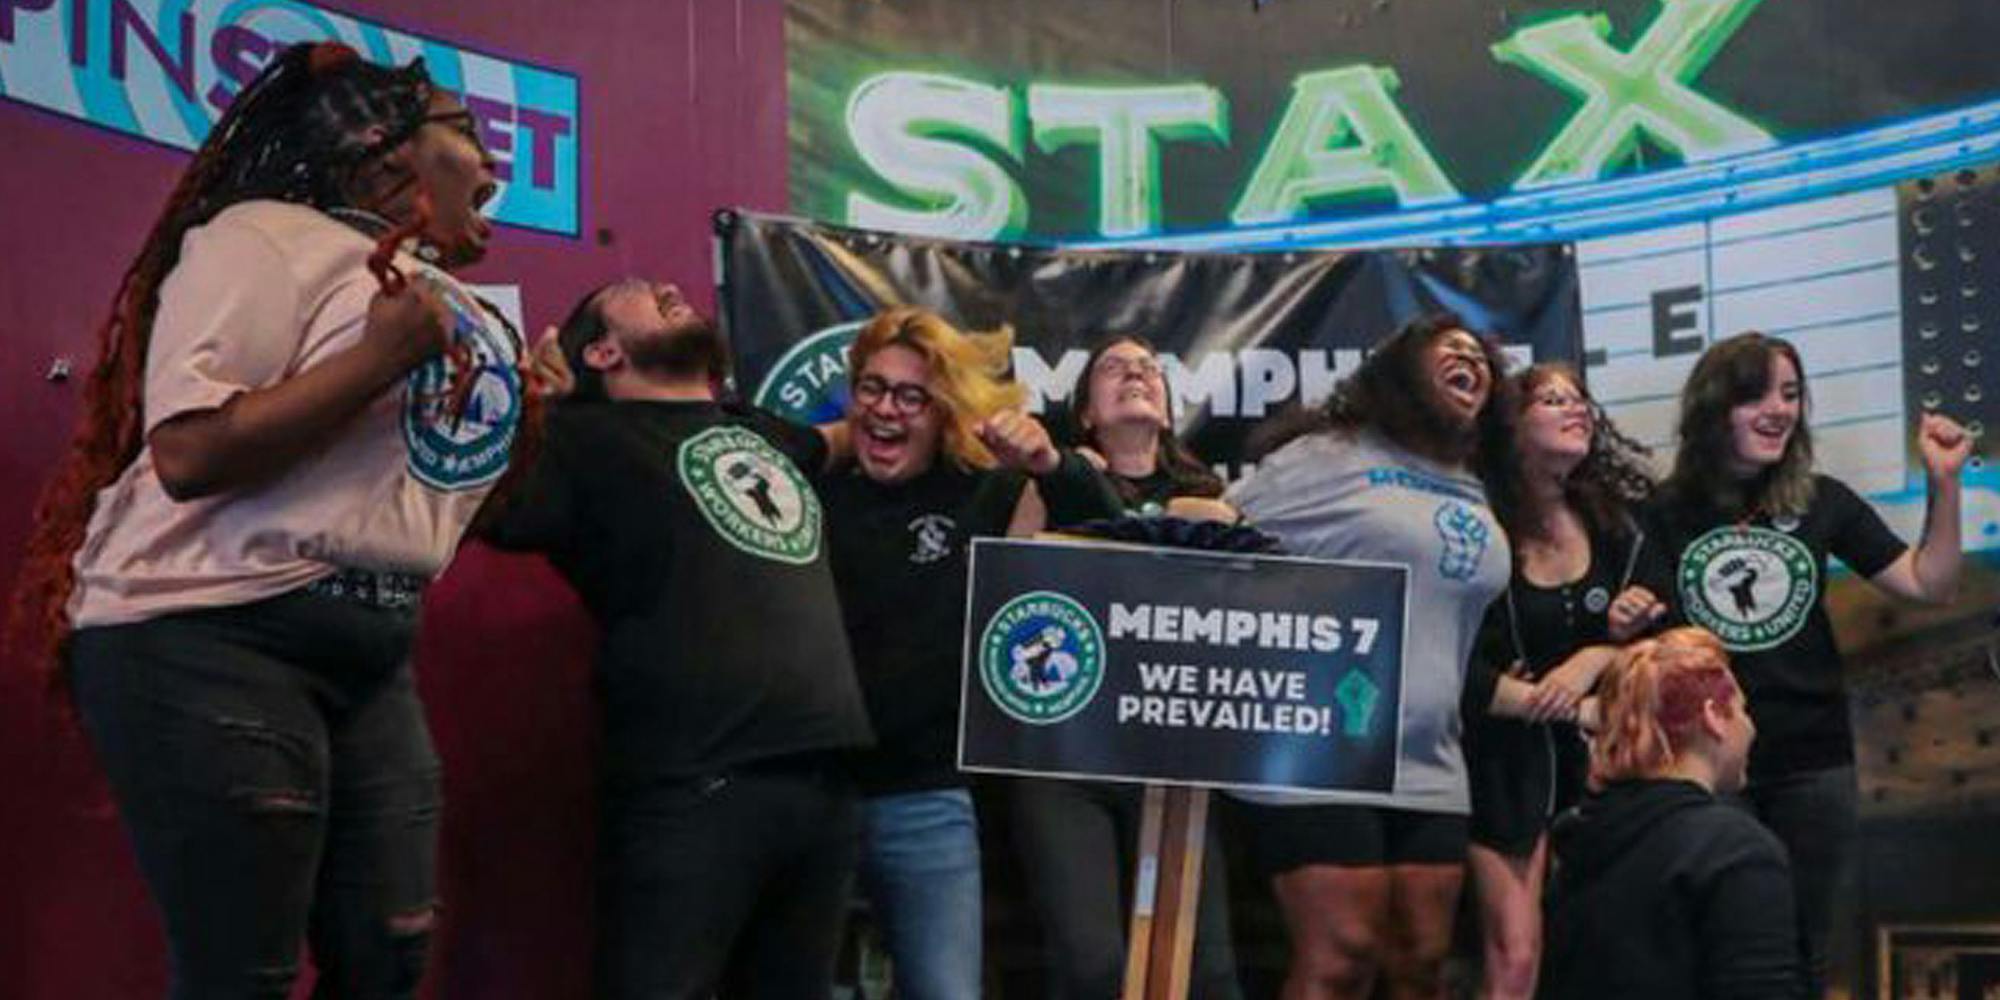 7 Memphis organizers celebrating next to sign ''MEMPHIS 7 WE HAVE PREVAILED!"